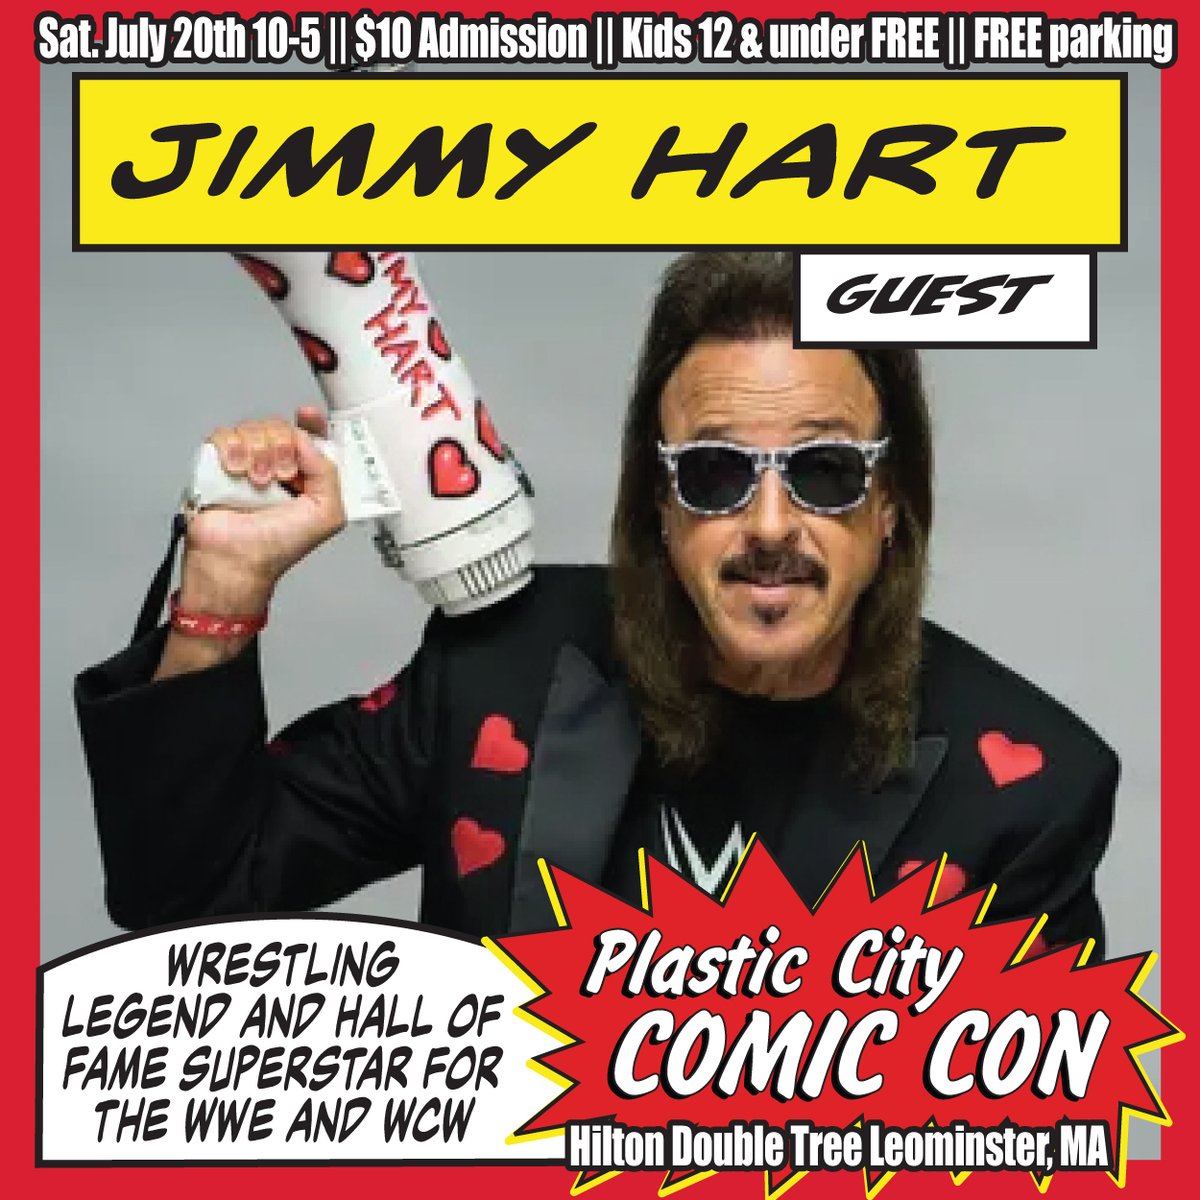 I've always said that Comics and Wrestling go together like chocolate and peanut butter! We have the greatest wrestling manager of all time joining us on July 20th!! $10 Admission!! @RealJimmyHart @PlasticCityCon